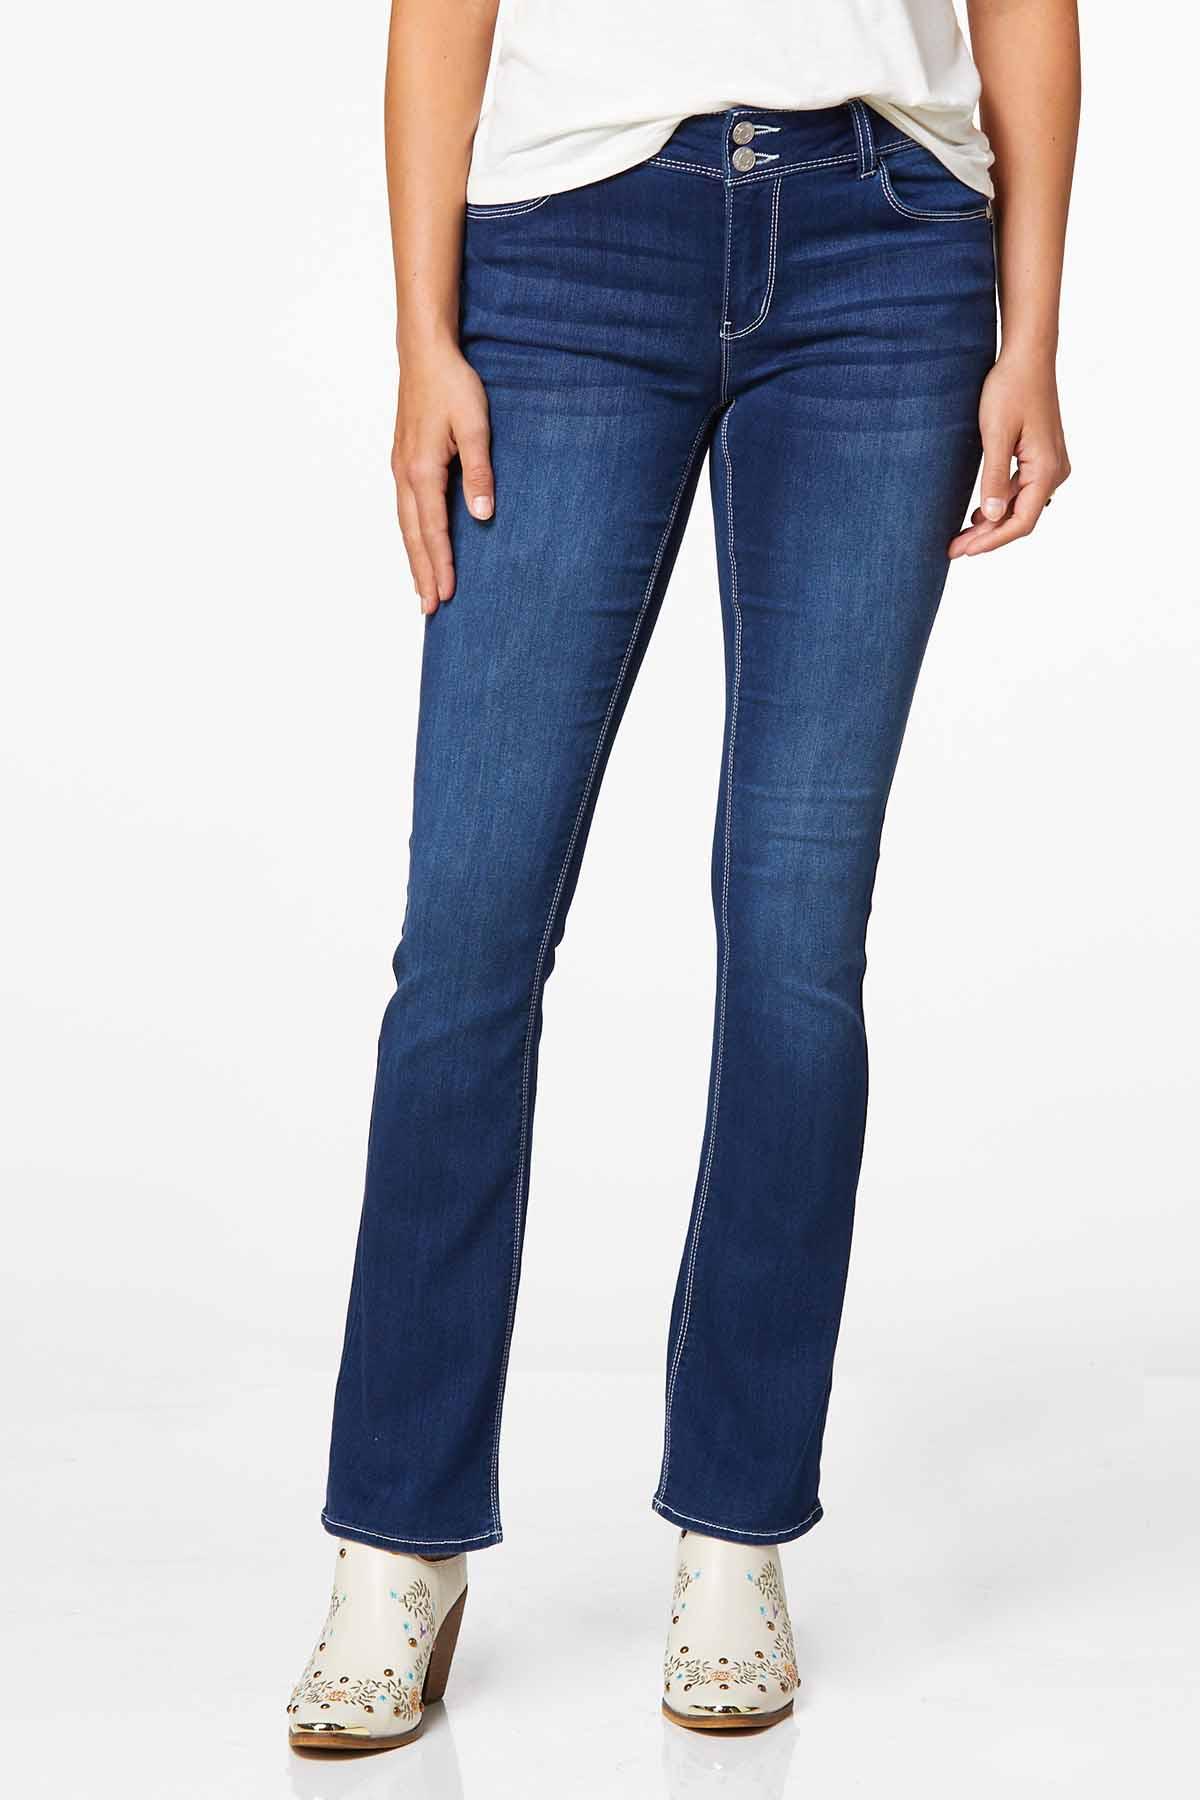 Cato Fashions  Cato Mid Rise Bootcut Jeans